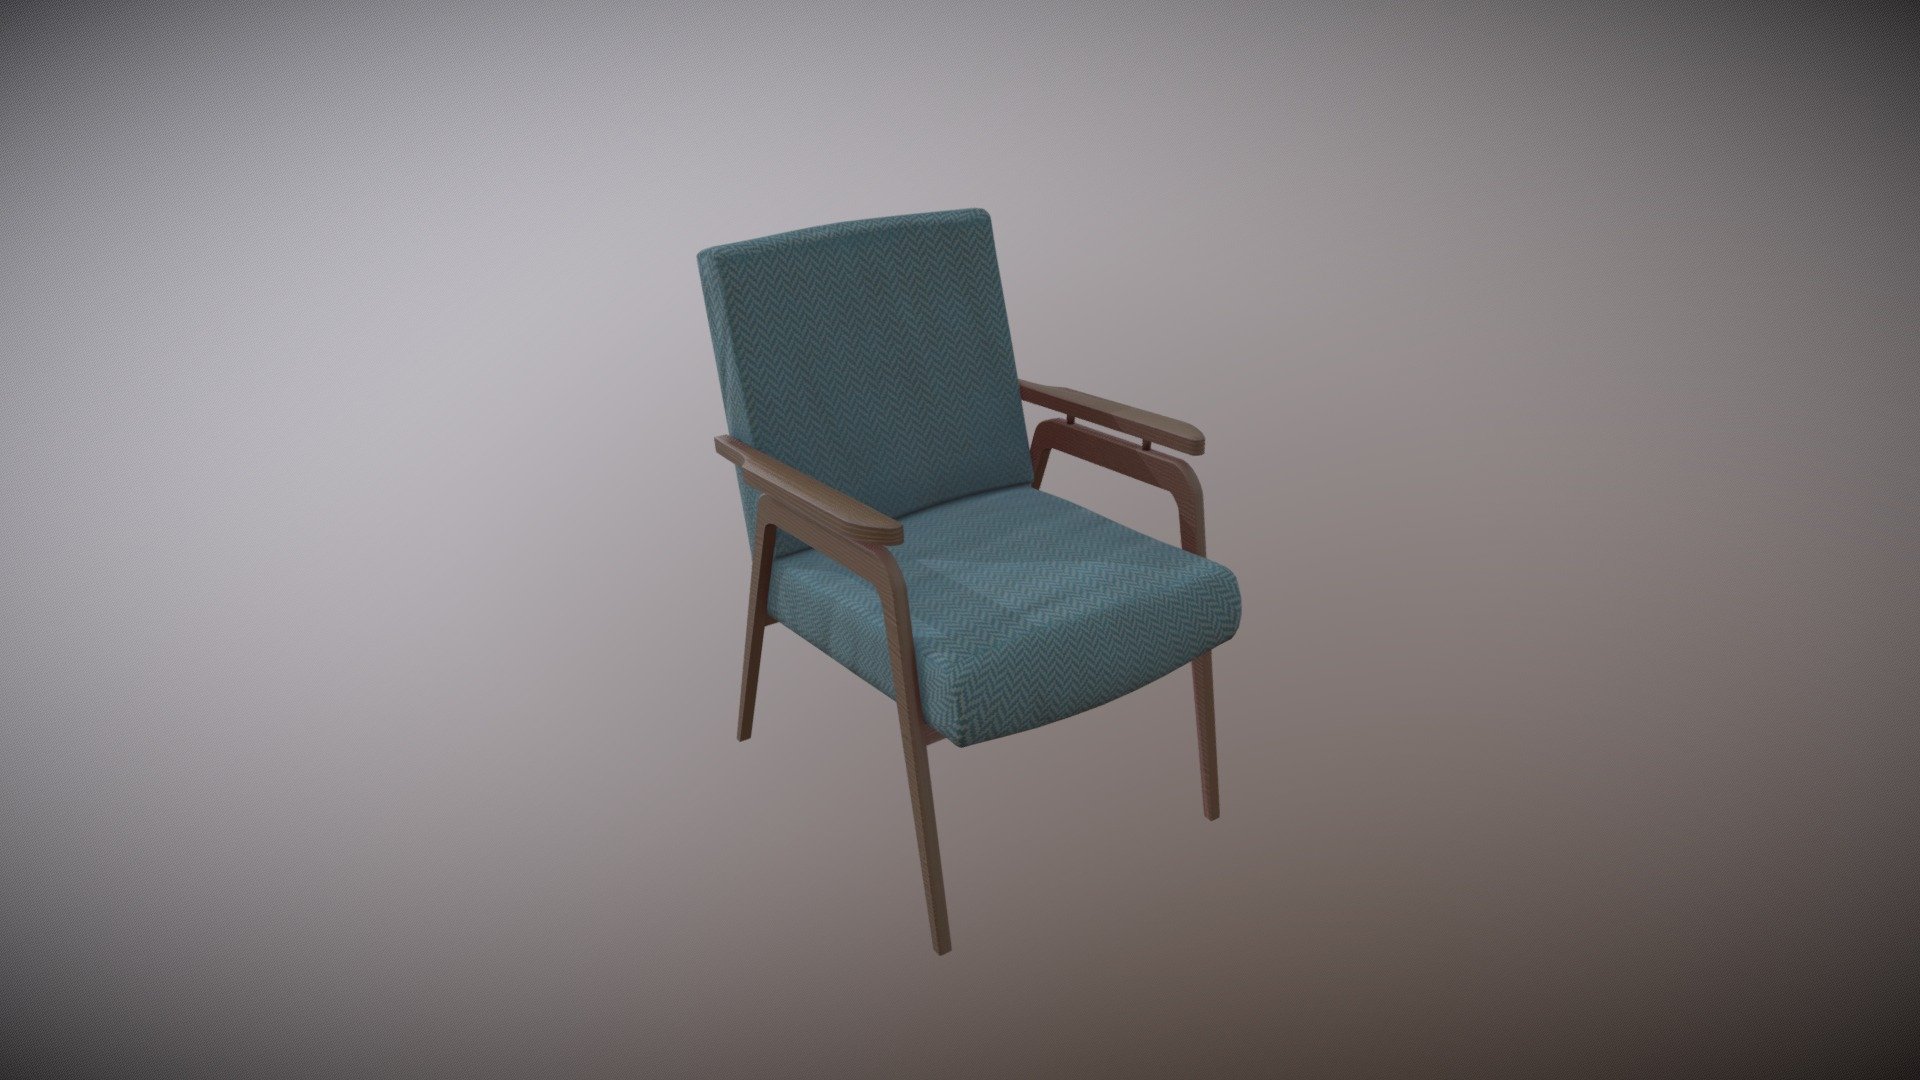 The model was based on an old Soviet armchair. You can use it in your projects 3d model